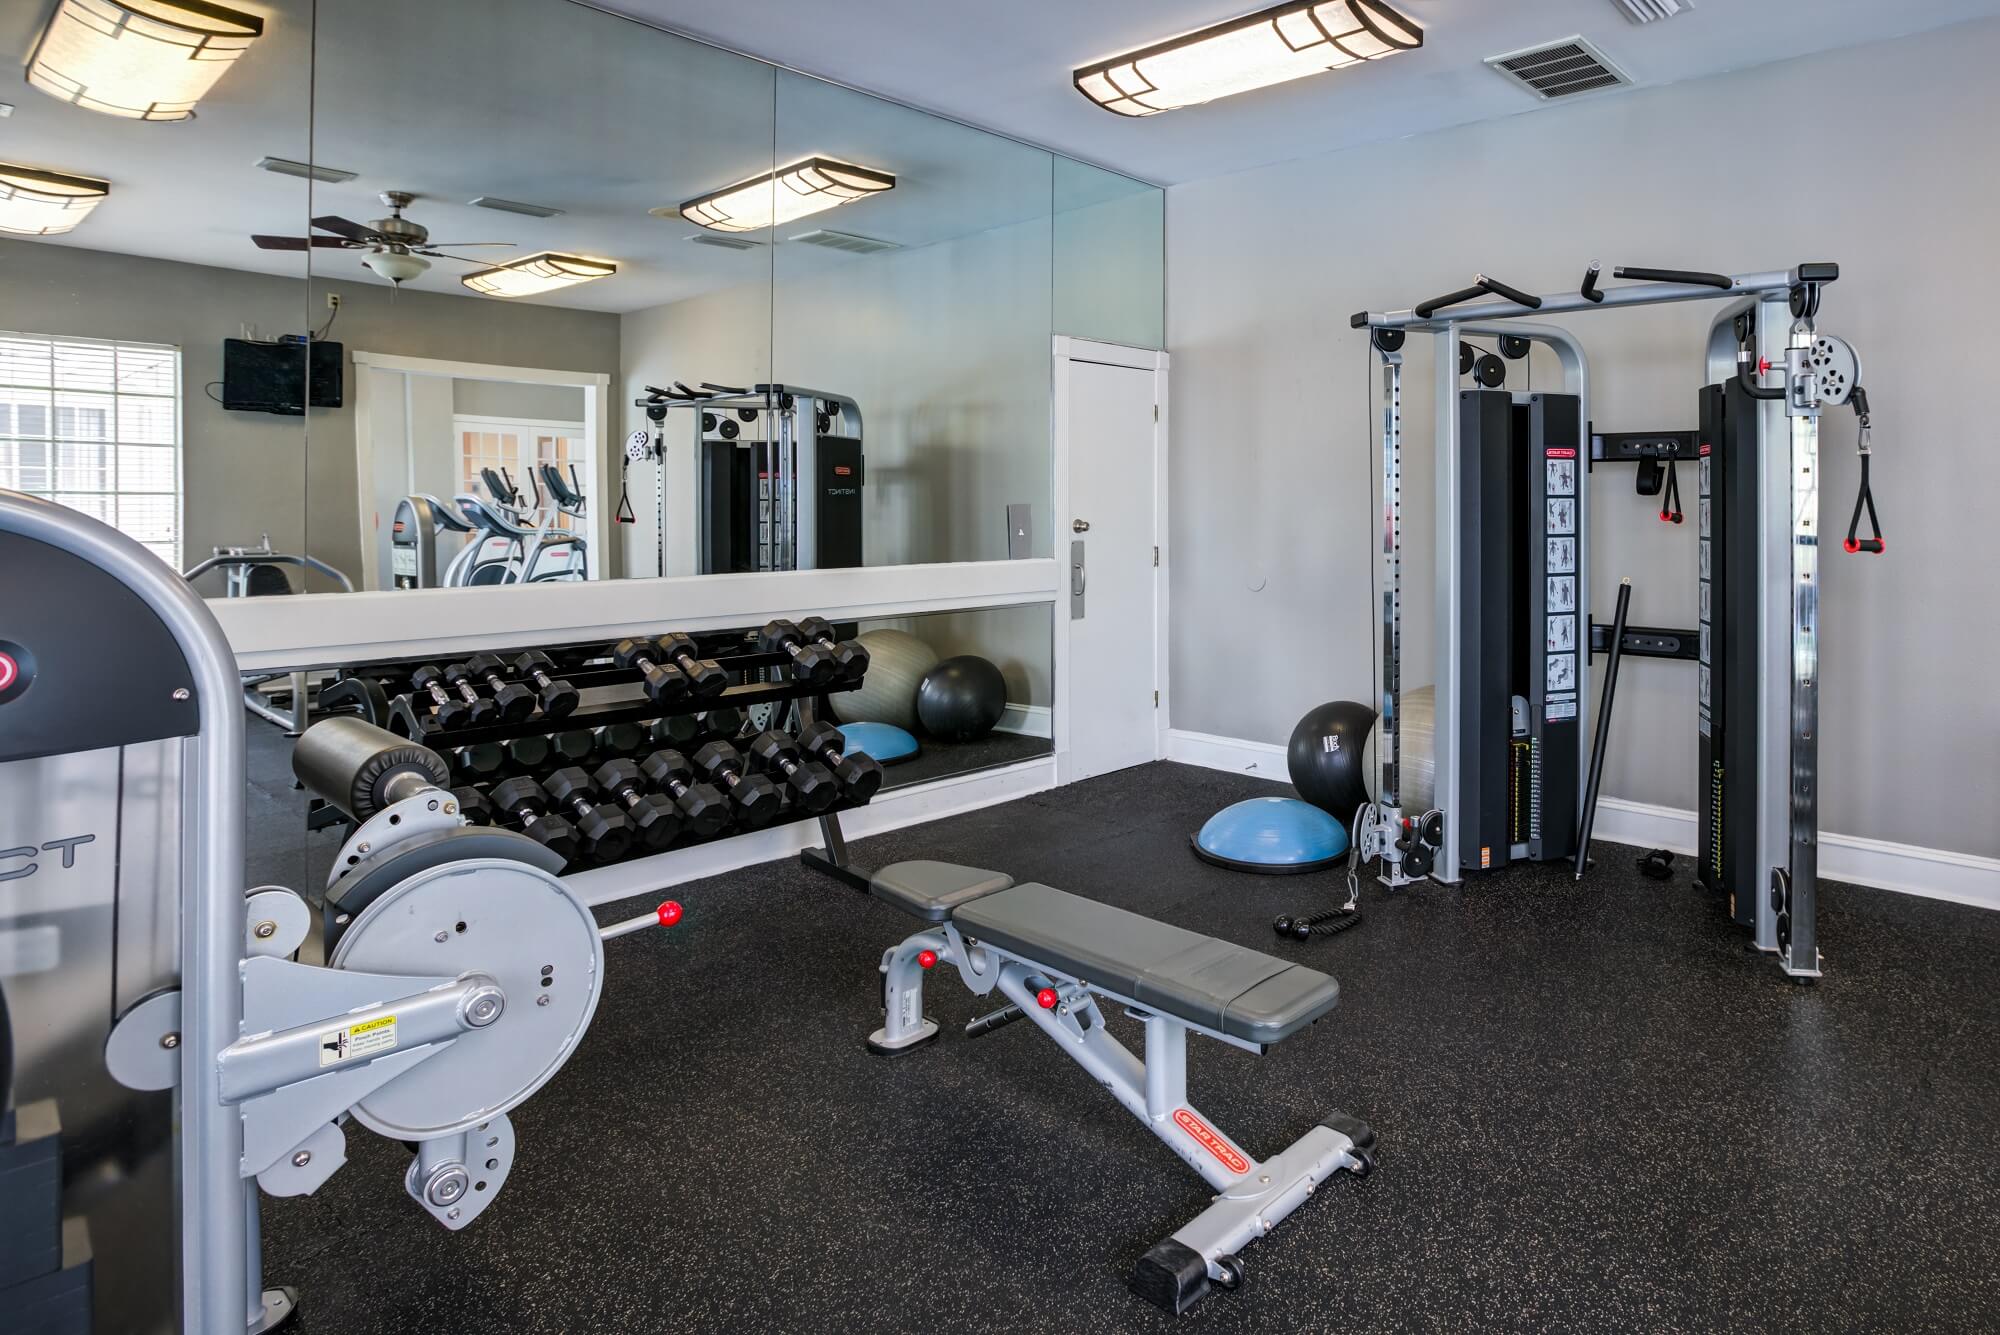 fitness center with mirrored wall, free weights, bench, and weight machines.